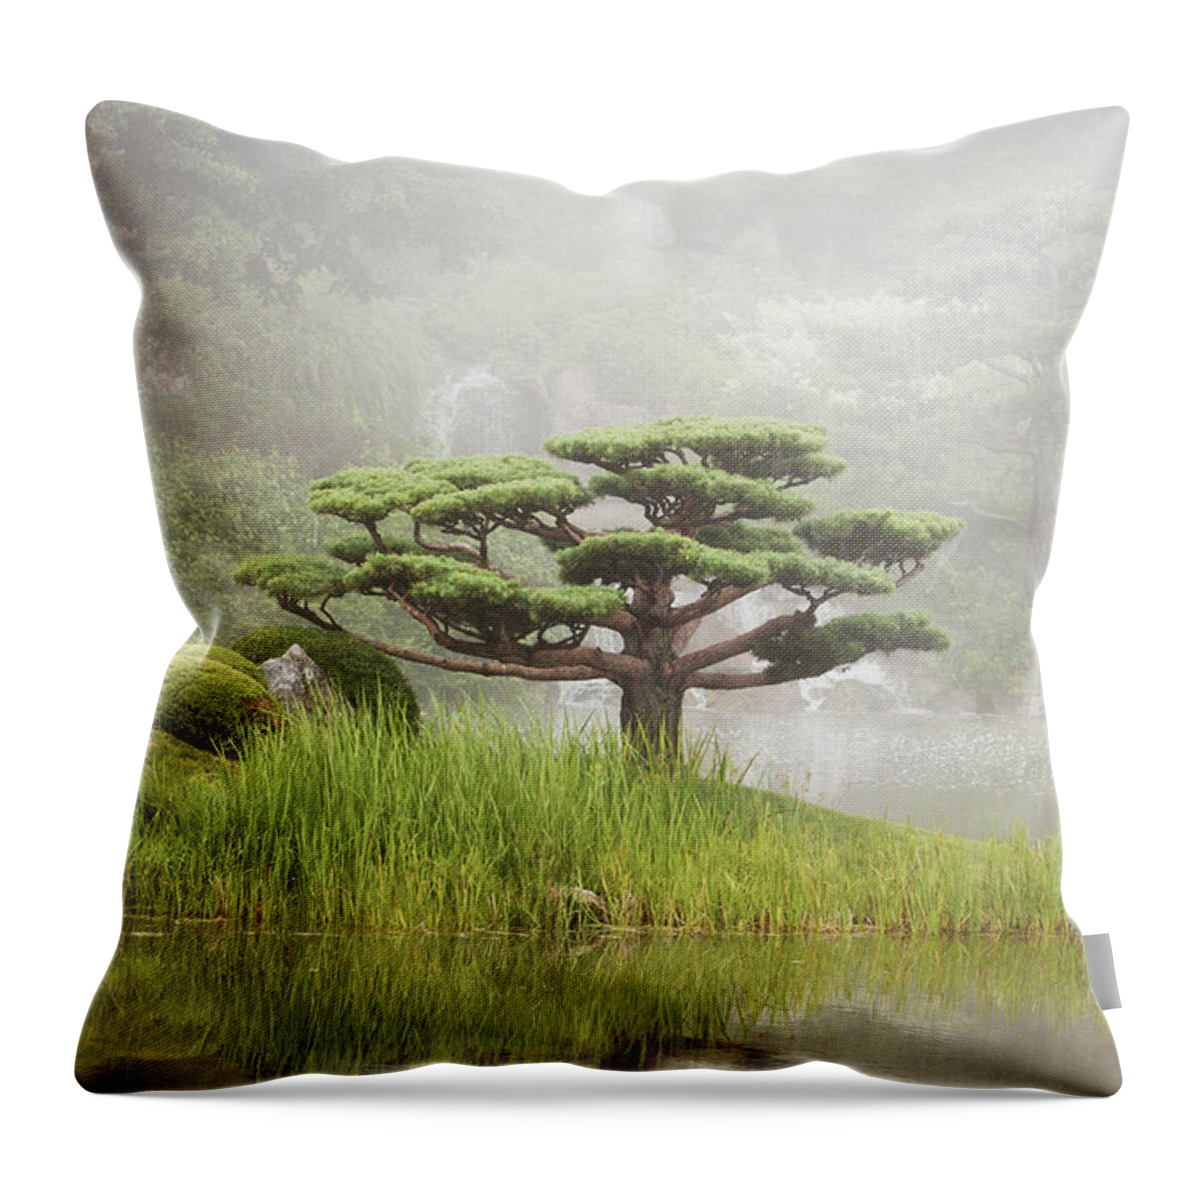 Grant Me Serenity Throw Pillow featuring the photograph Grant Me Serenity by Patty Colabuono